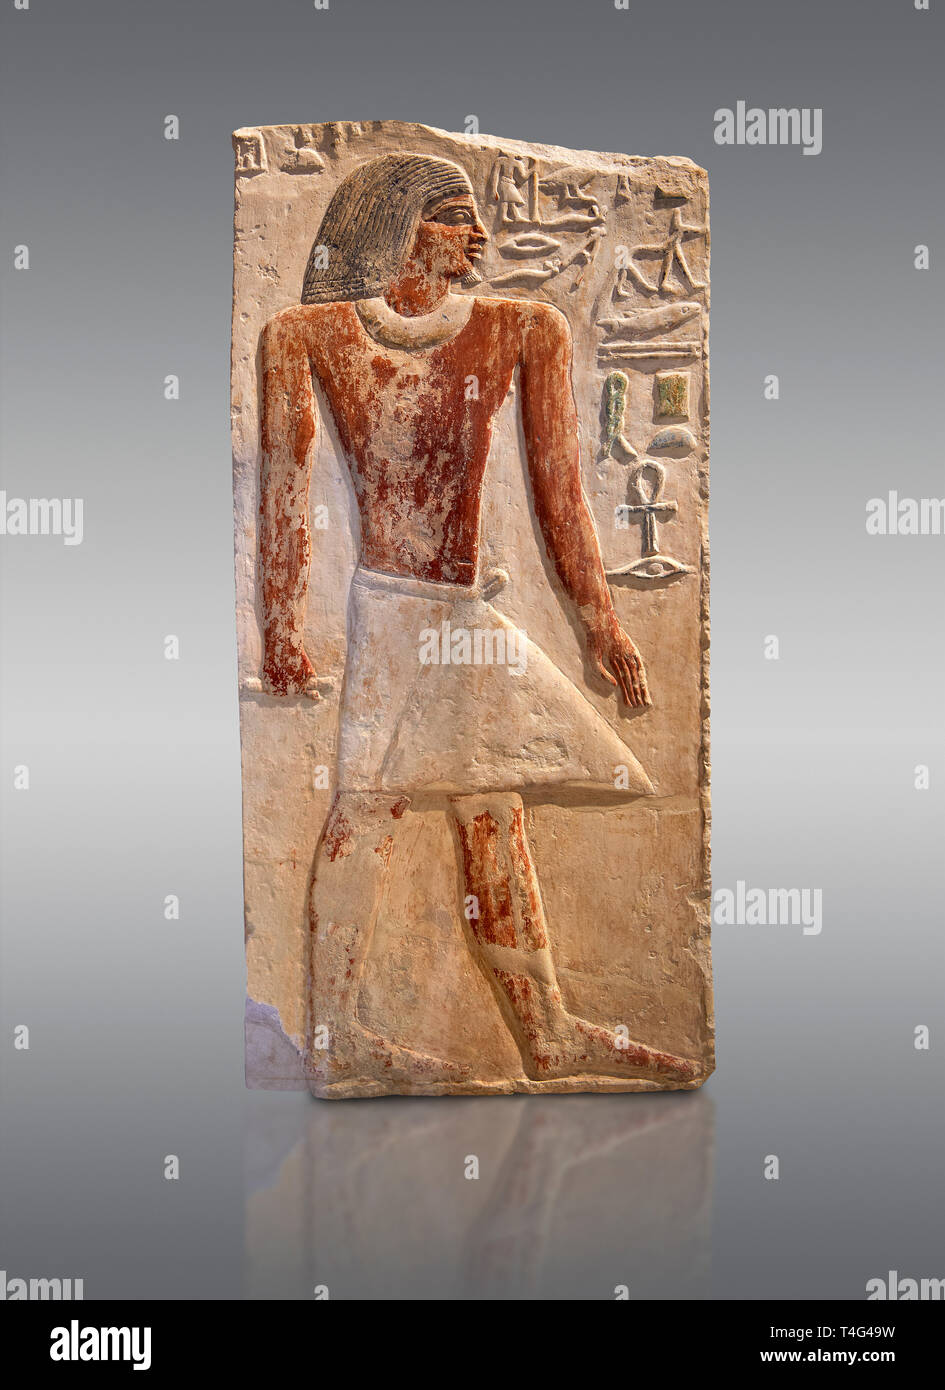 Ancient Egyptian tomb relief sculpture depicting the scribe and judge Ankhirptah. Middle Kingdom Egypt, 2170 BC. Neues Museum Berlin Cat No: AM 7337 Stock Photo